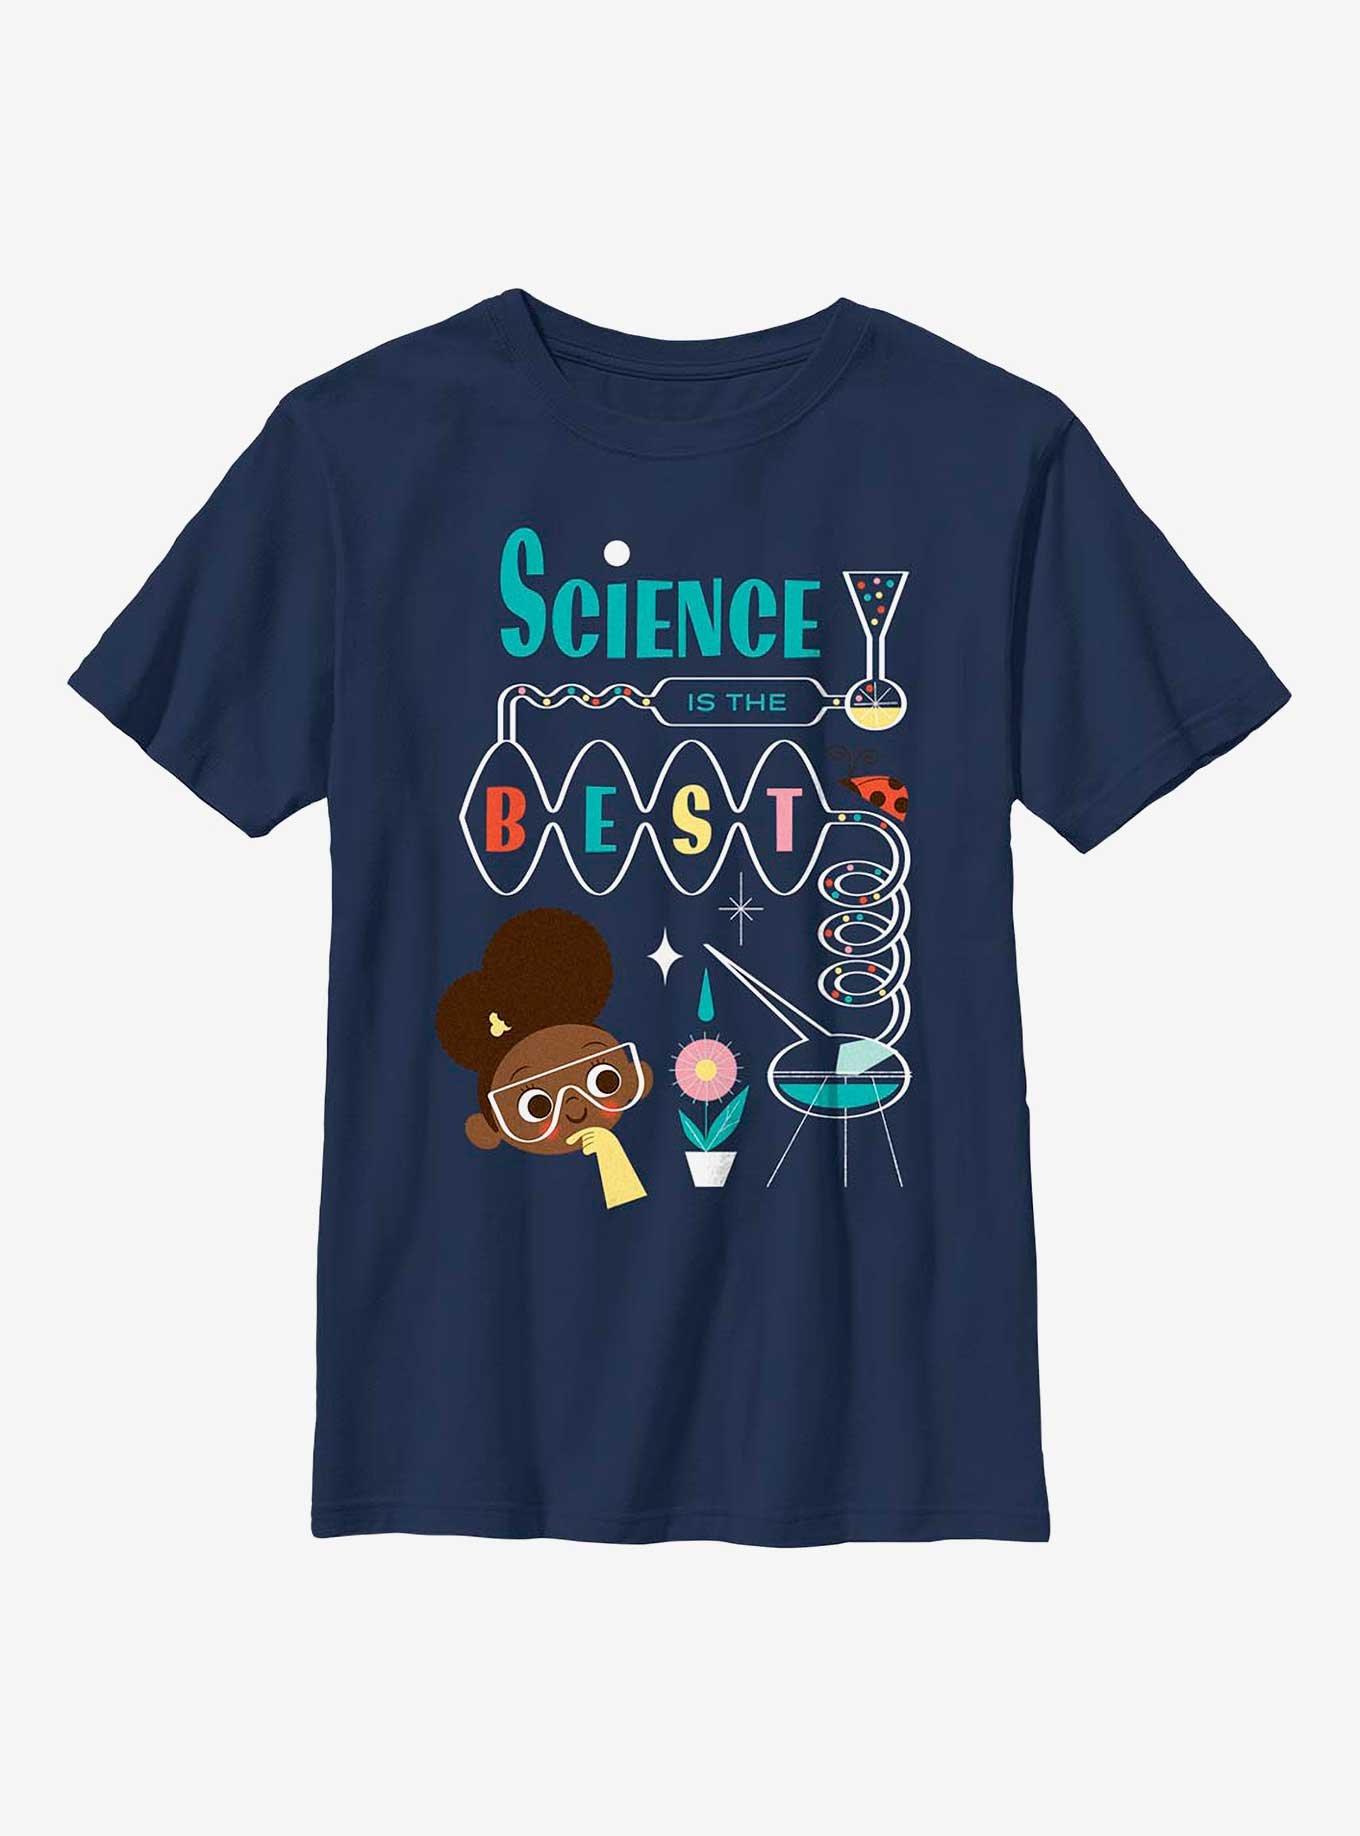 Ada Twist, Scientist Science Is The Best Titration Youth T-Shirt, NAVY, hi-res